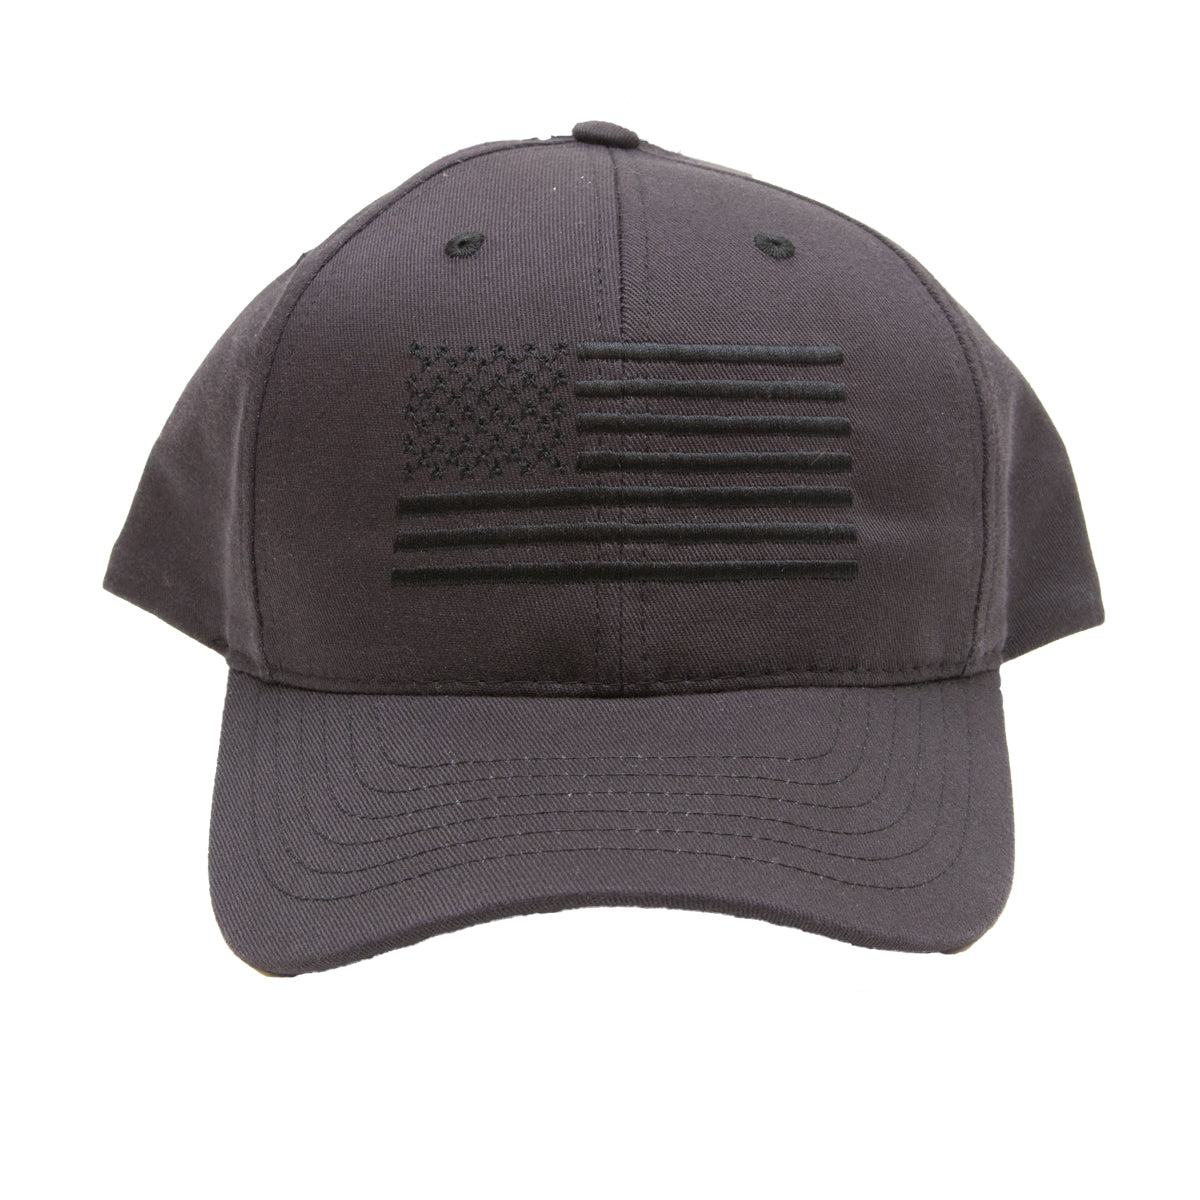 HATS Made in USA: All American Clothing - All American Clothing Co